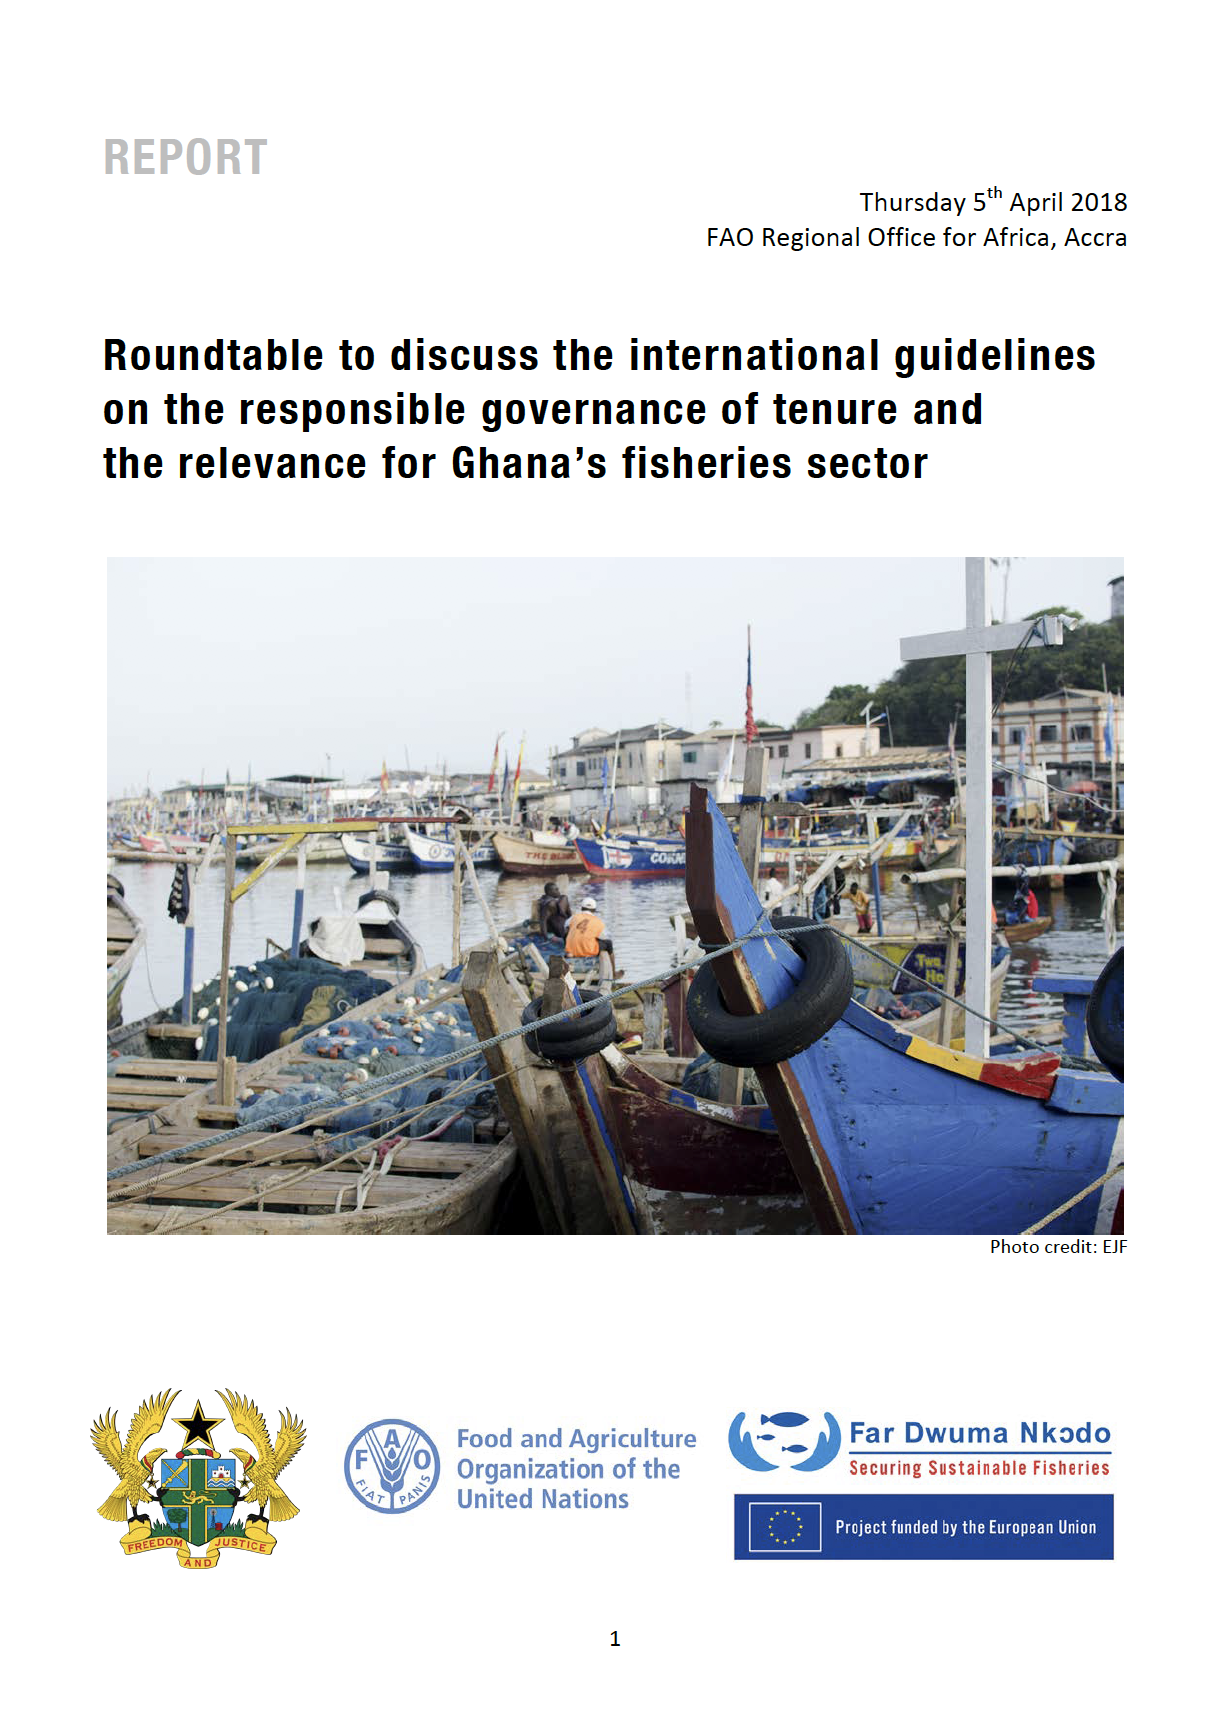 Roundtable to discuss the international guidelines on the responsible governance of tenure and the relevance for Ghana’s fisheries sector